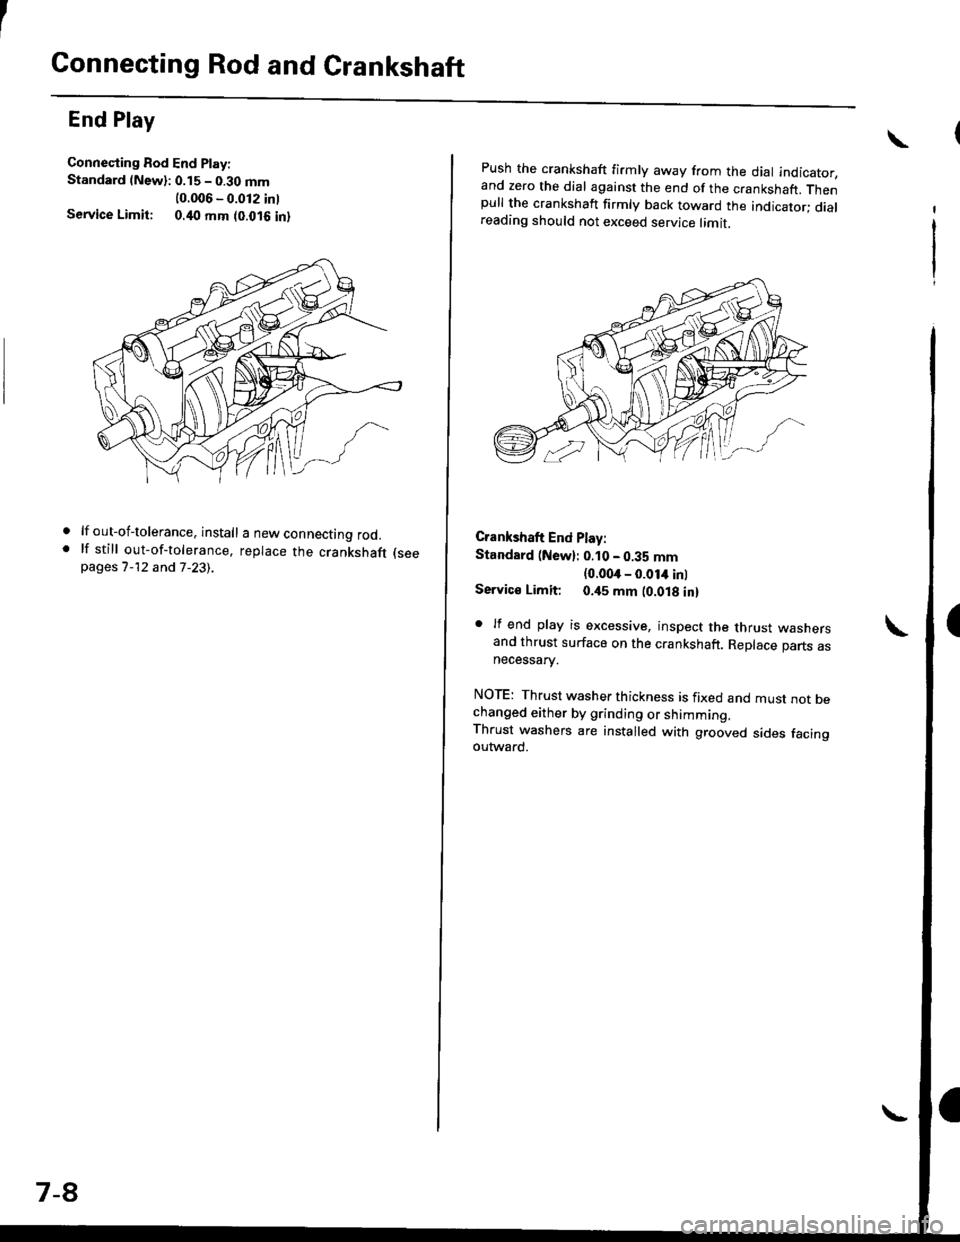 HONDA CIVIC 1996 6.G Workshop Manual Connecting Rod and Crankshaft
End Play
Connecling Bod End Play:
Standard (Newl: 0.15 - 0.30 mm
10.006 - 0.012 inlService Limit: 0.40 mm (0.016 inl
lf out-of-tolerance. install a new connecting rod.lf 